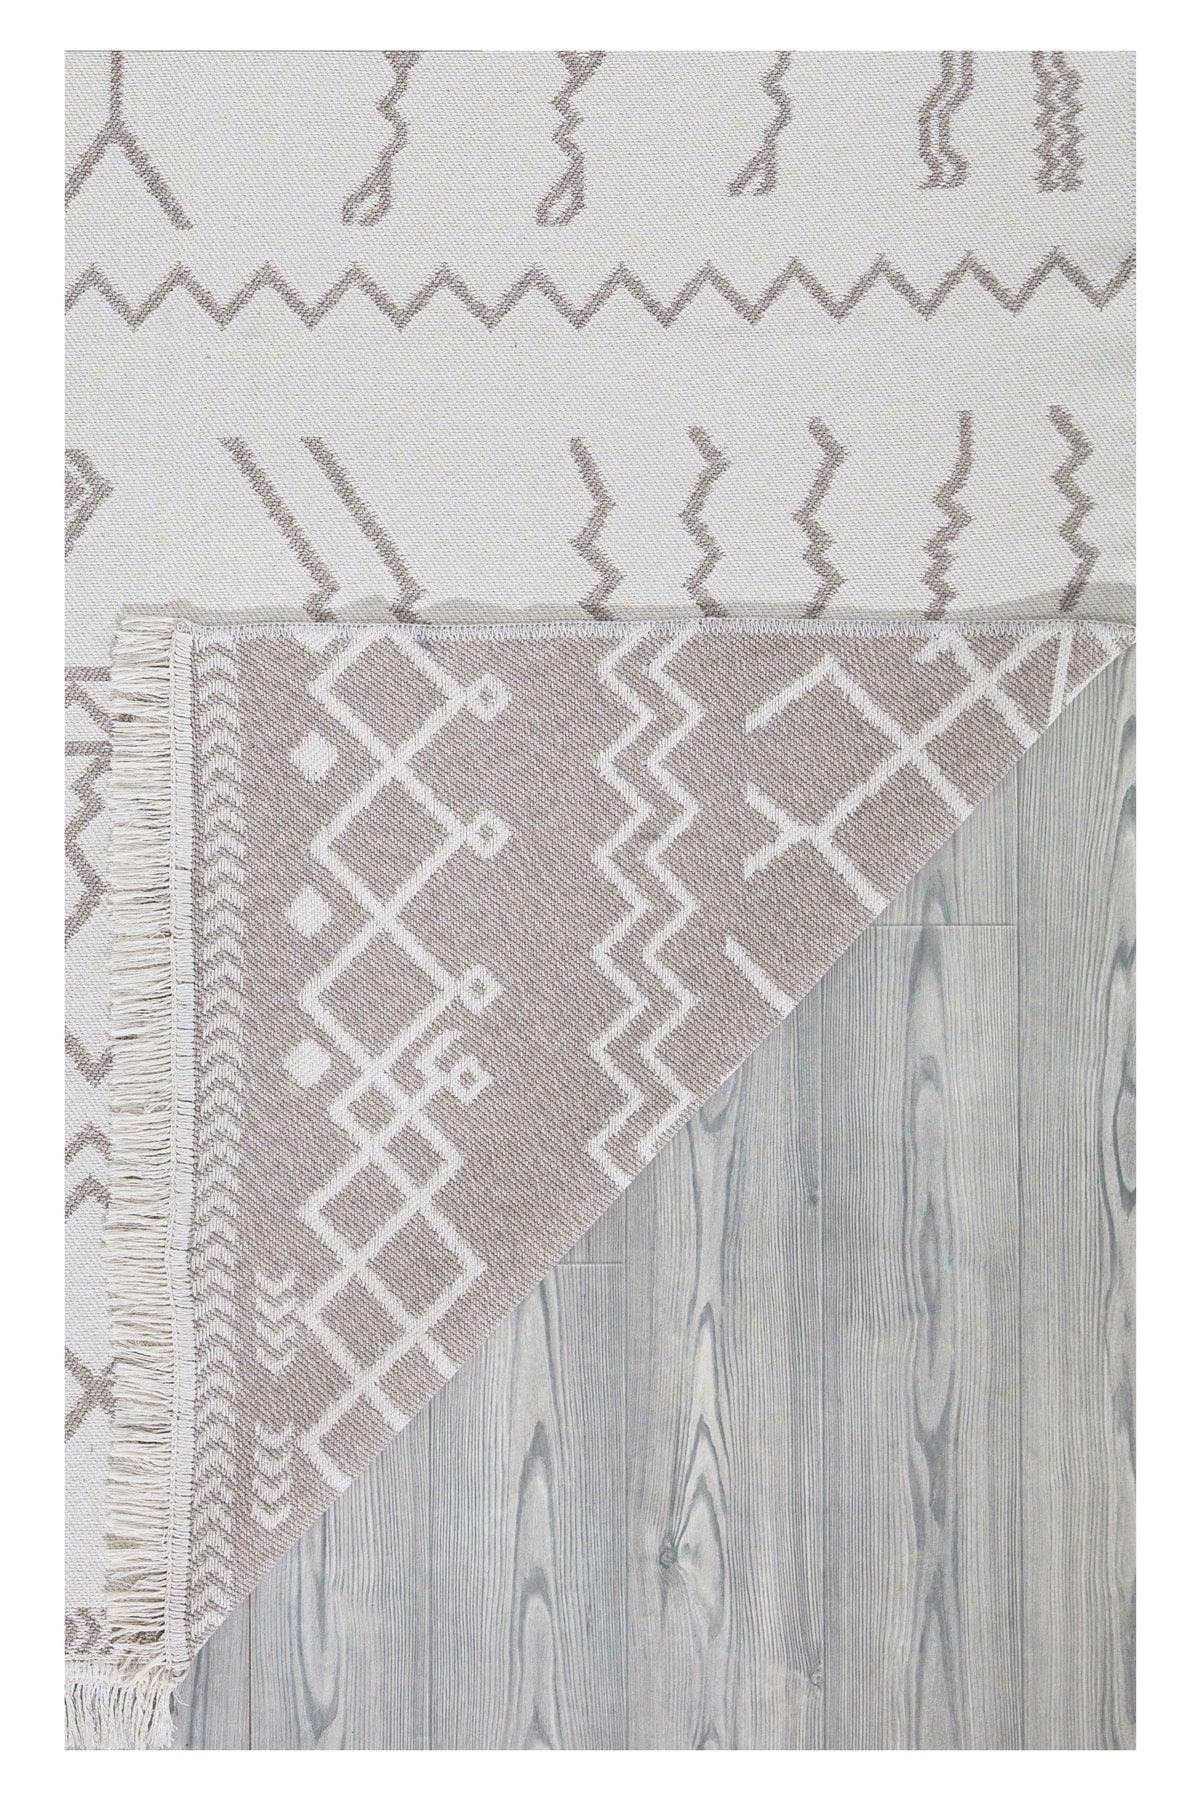 Duo White Beige Washable Double Sided Rug Woven Fringed Carpet Rug Runner Balcony Kitchen 23001a - Swordslife